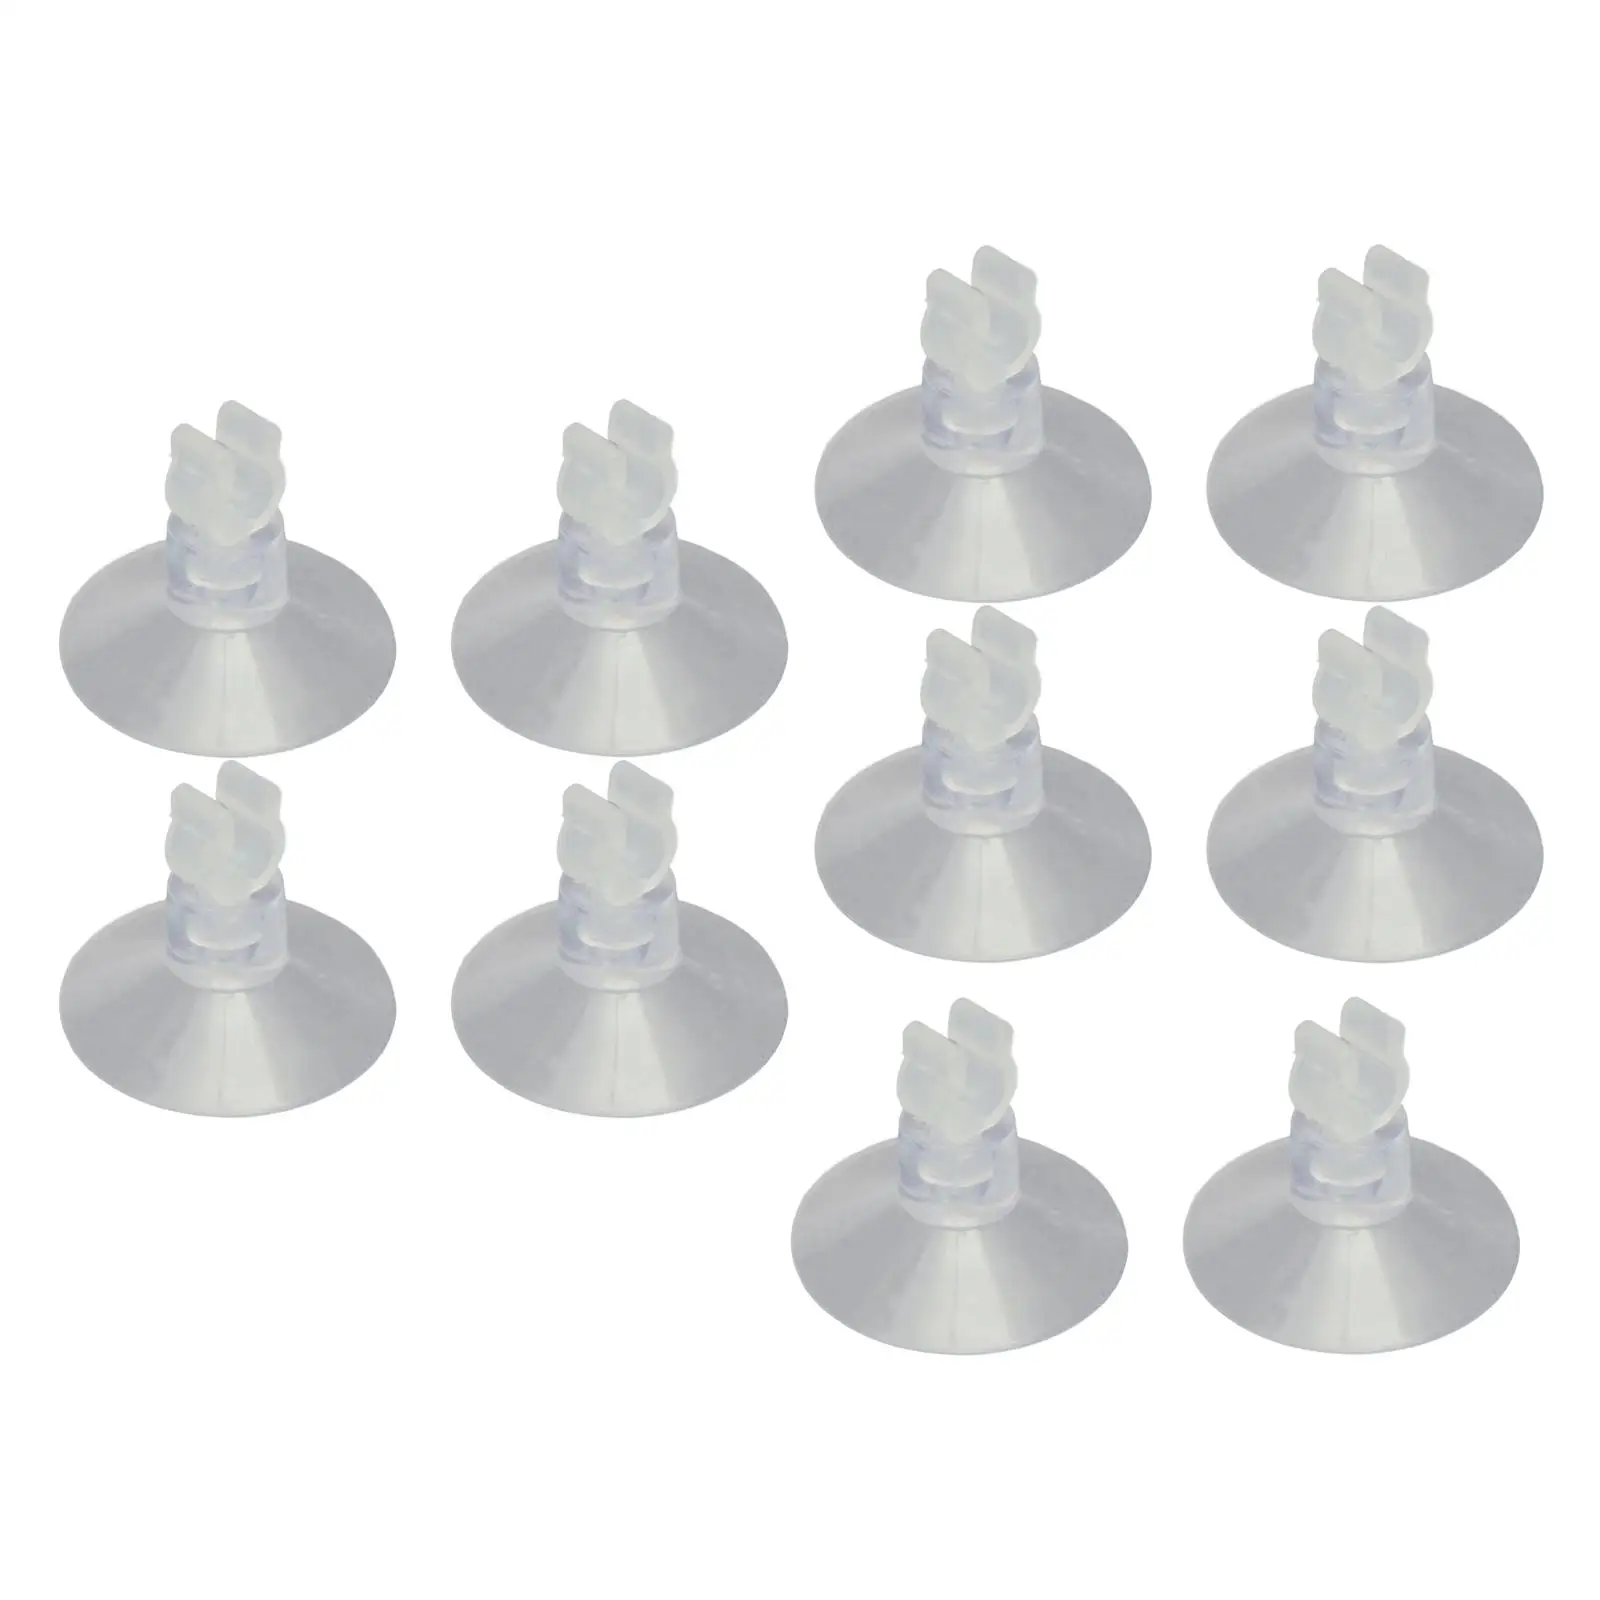 Air Line Pump Tube Holder Fish Tank Suckers Tube Holder Suction Cups Suckers Clips Pads Clear for Airline Tubing Hose